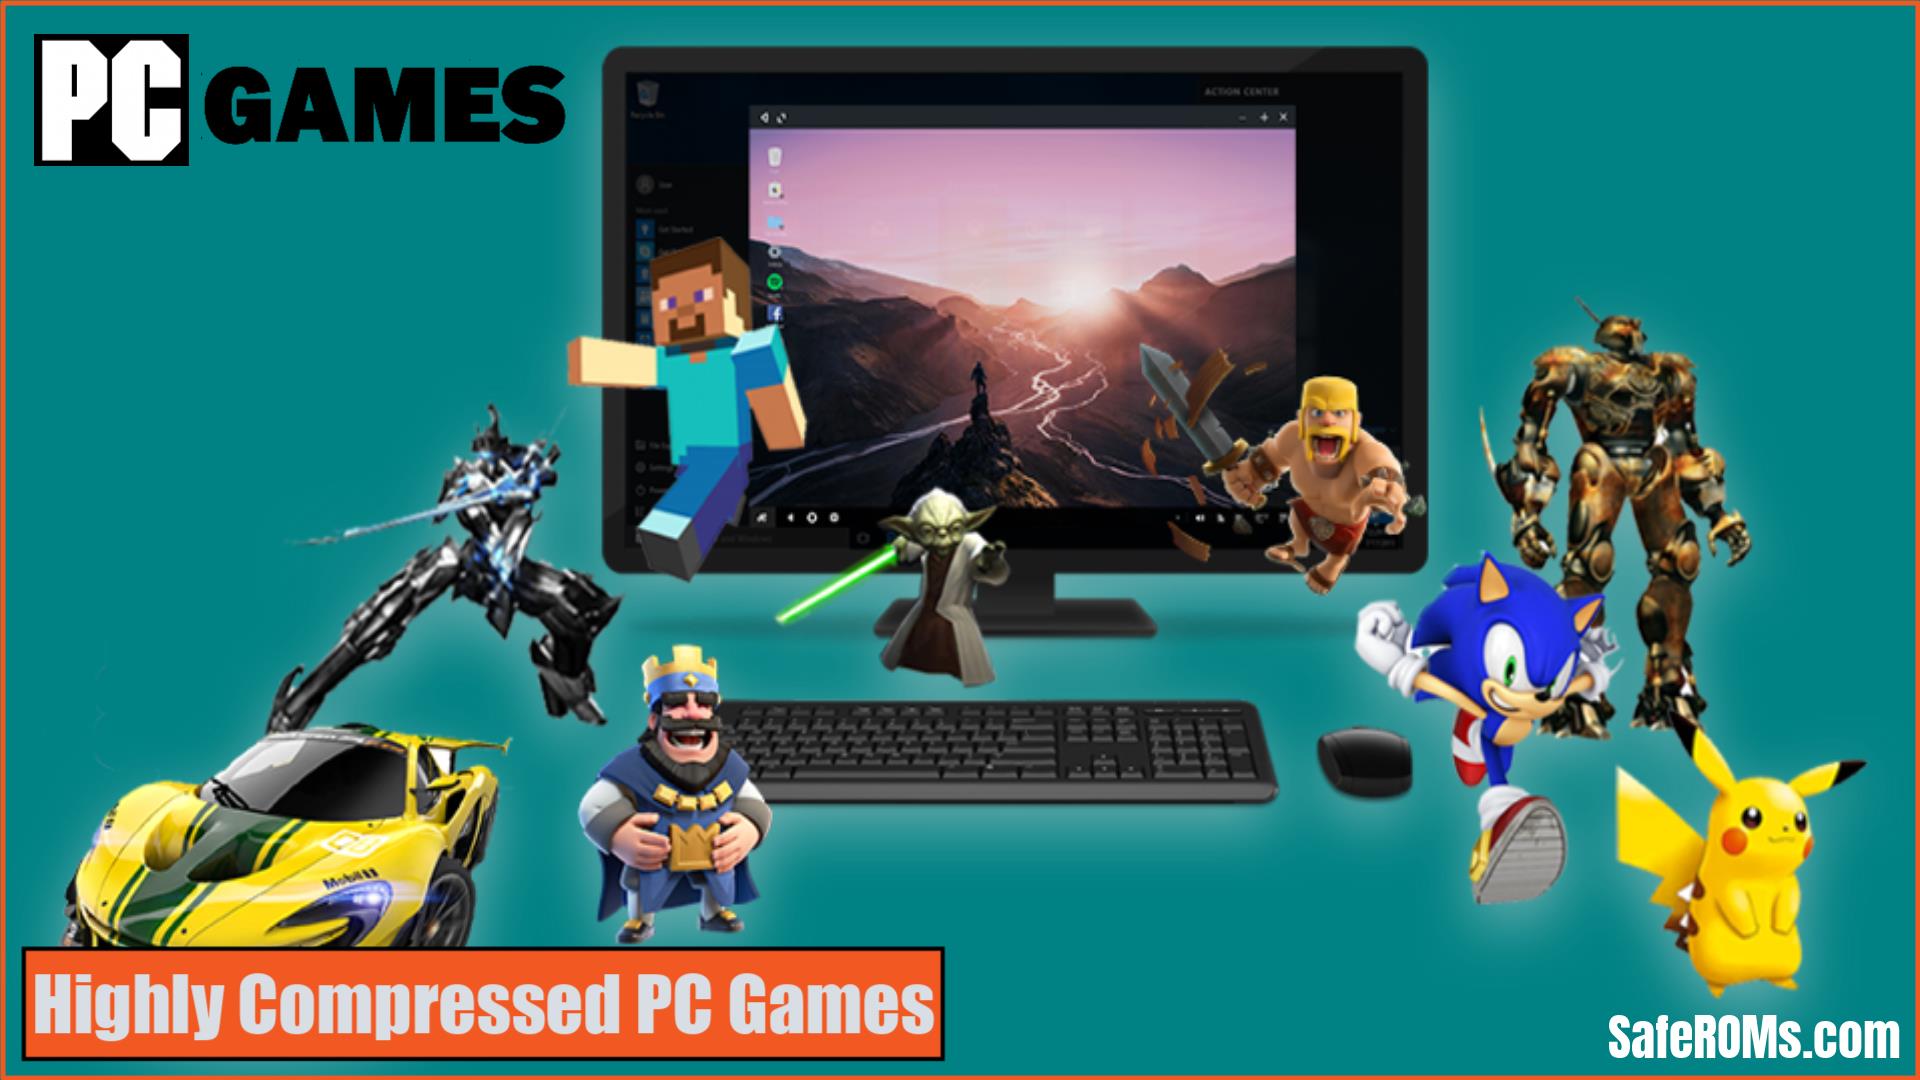 Highly Compressed PC Games